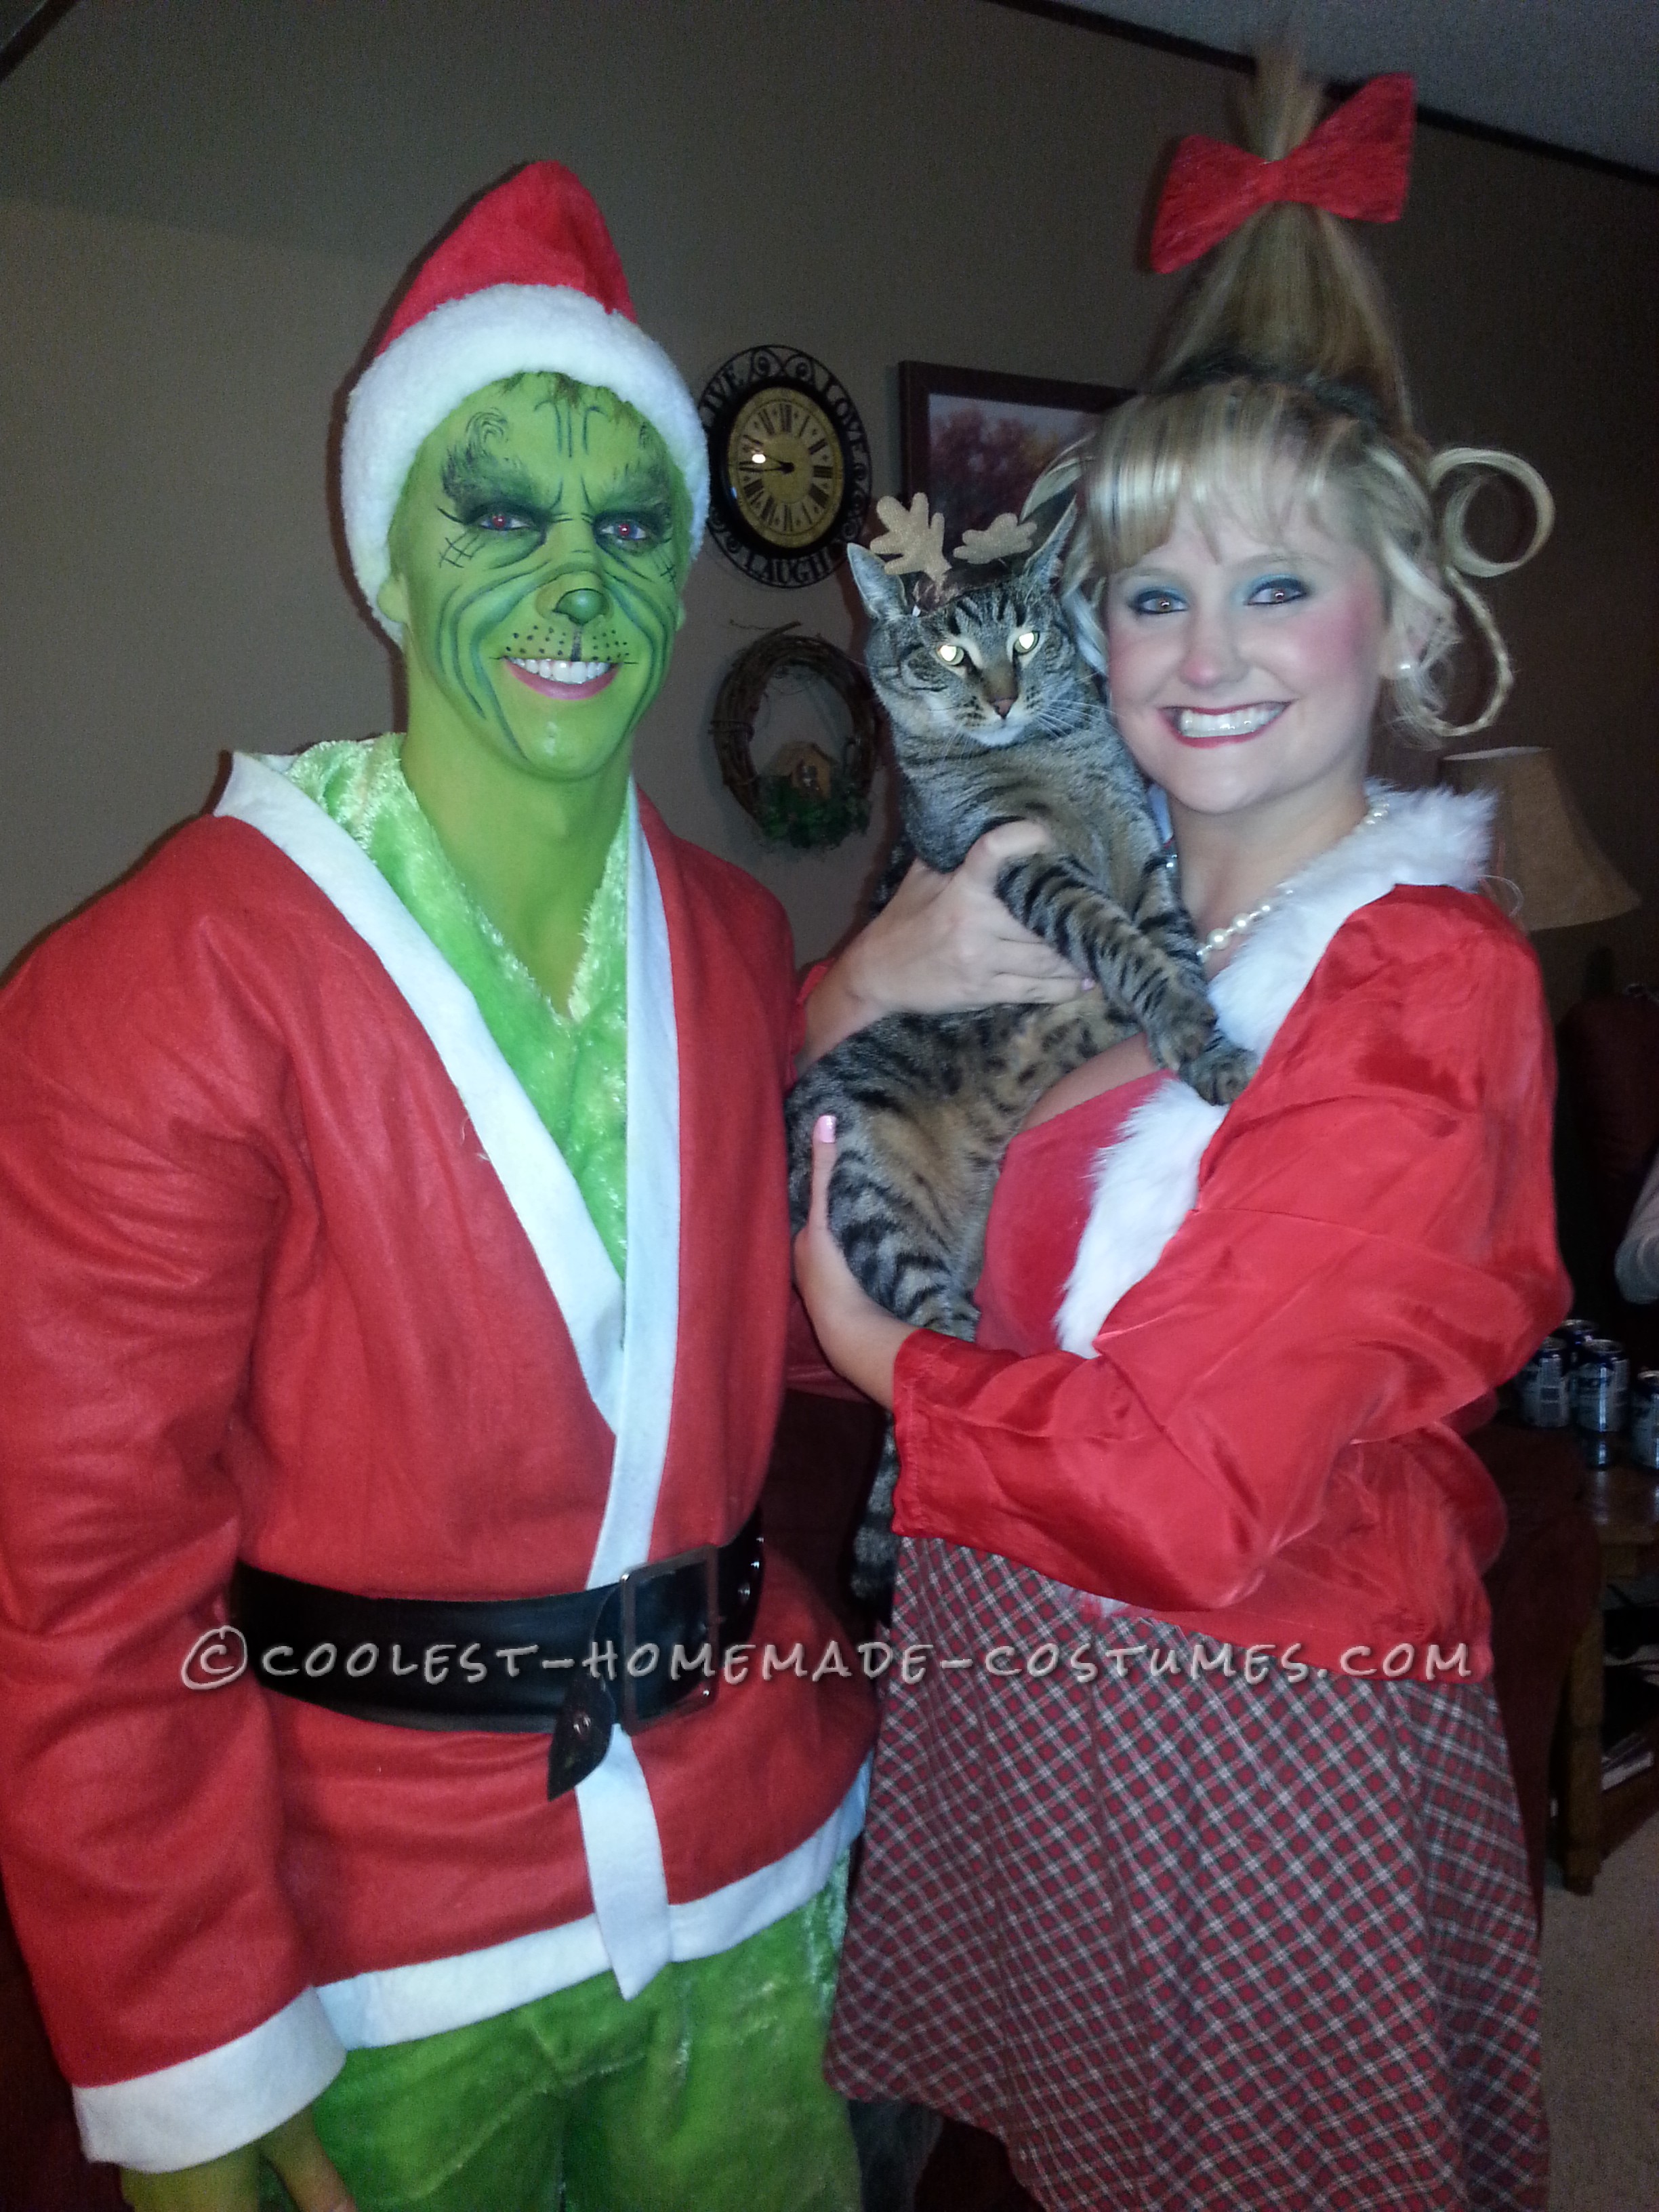 Cool Couples Halloween Costume: Grinch and Cindy Lou Who